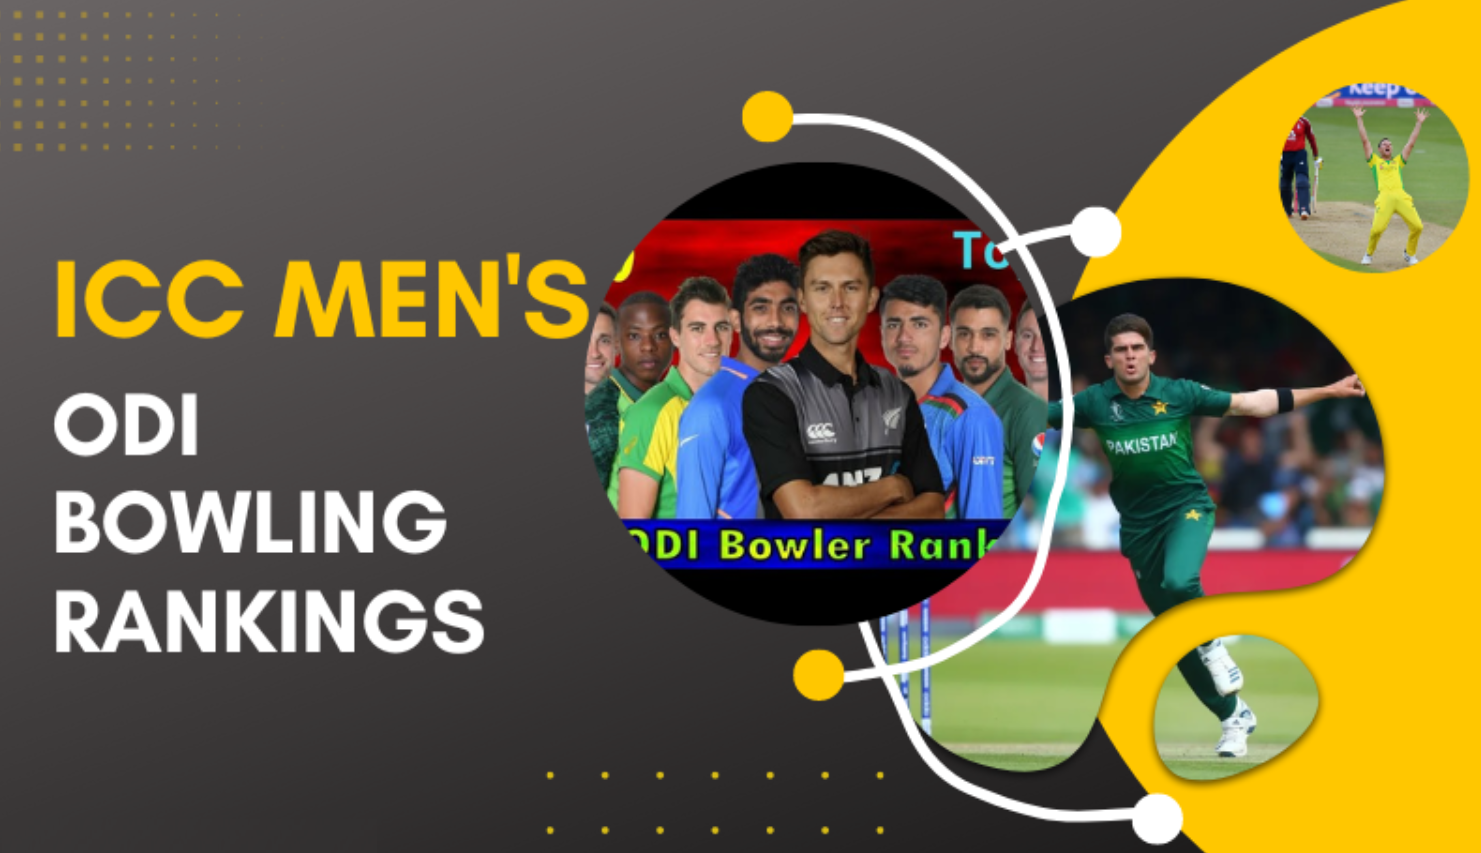 How are bowlers ranked by the ICC in professional cricket?